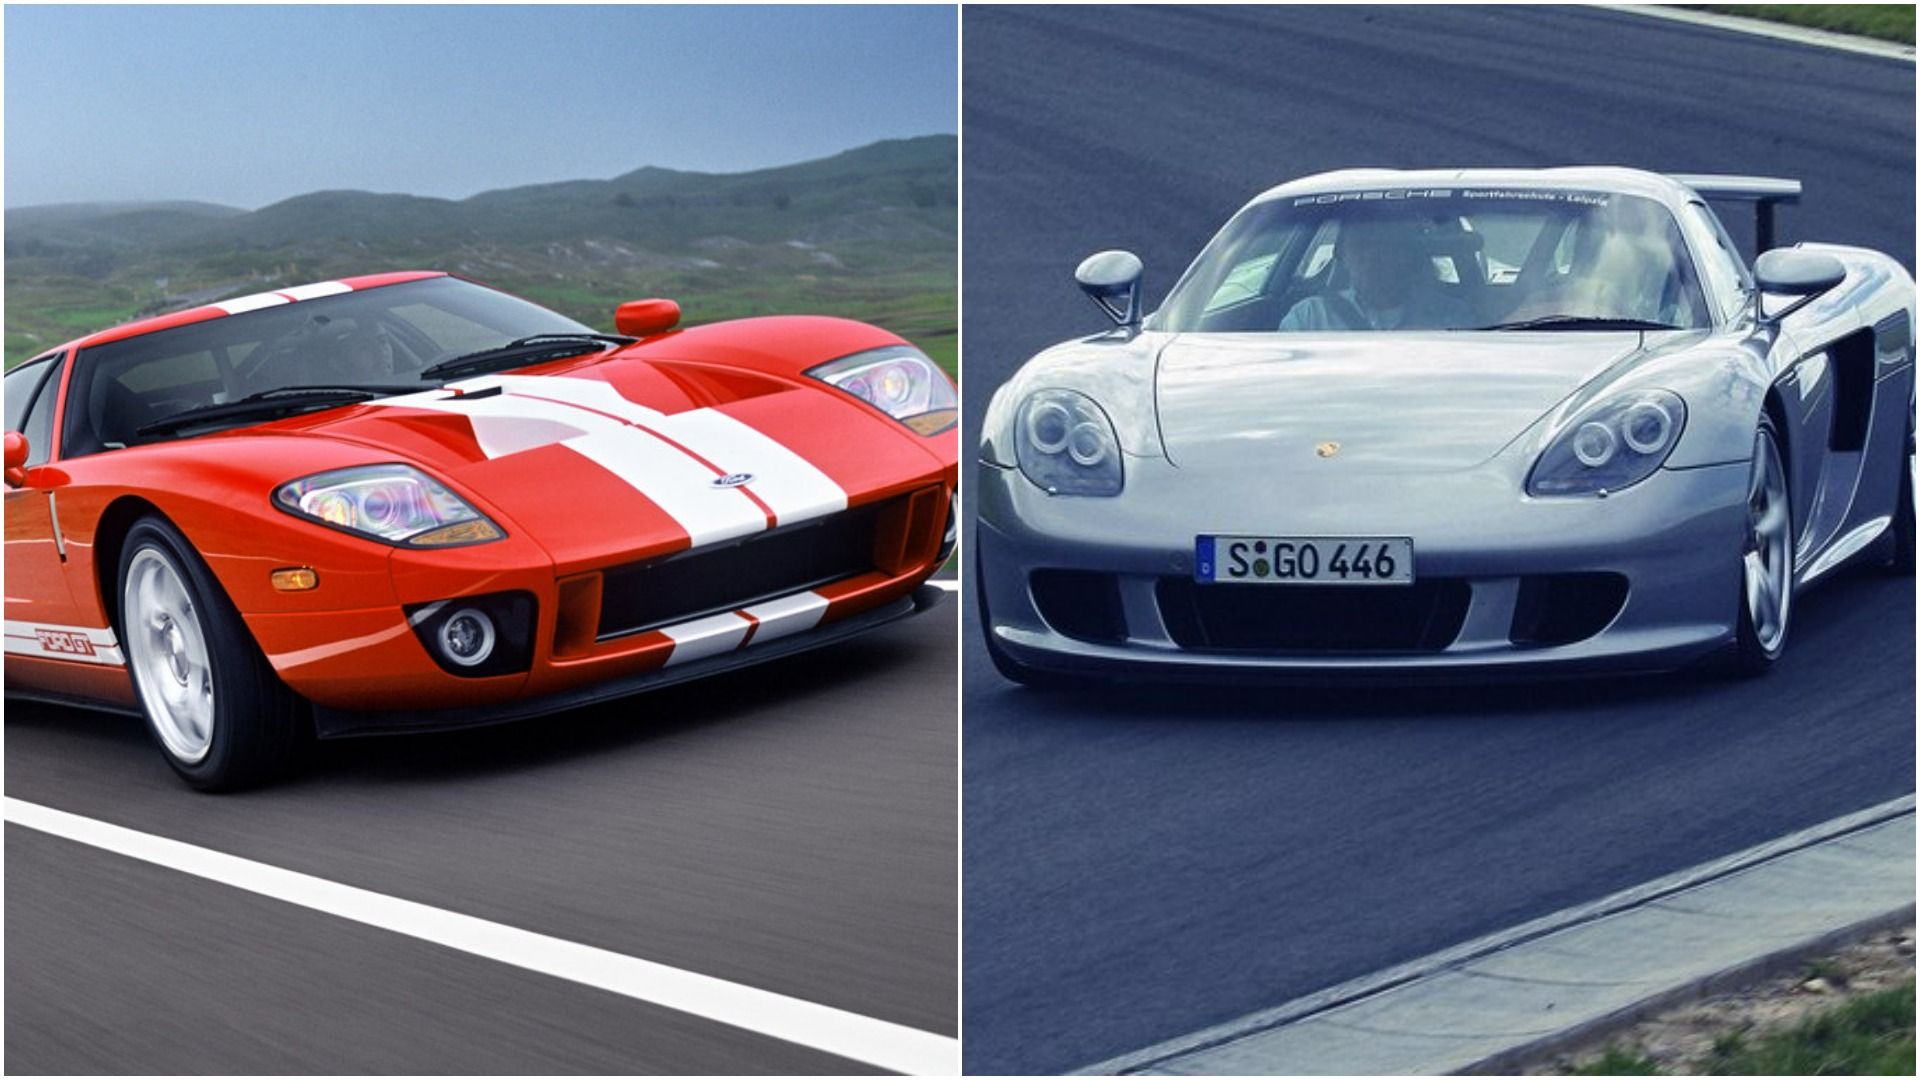 Supercar Icons: Here's How The Porsche GT Compares To The Ford GT